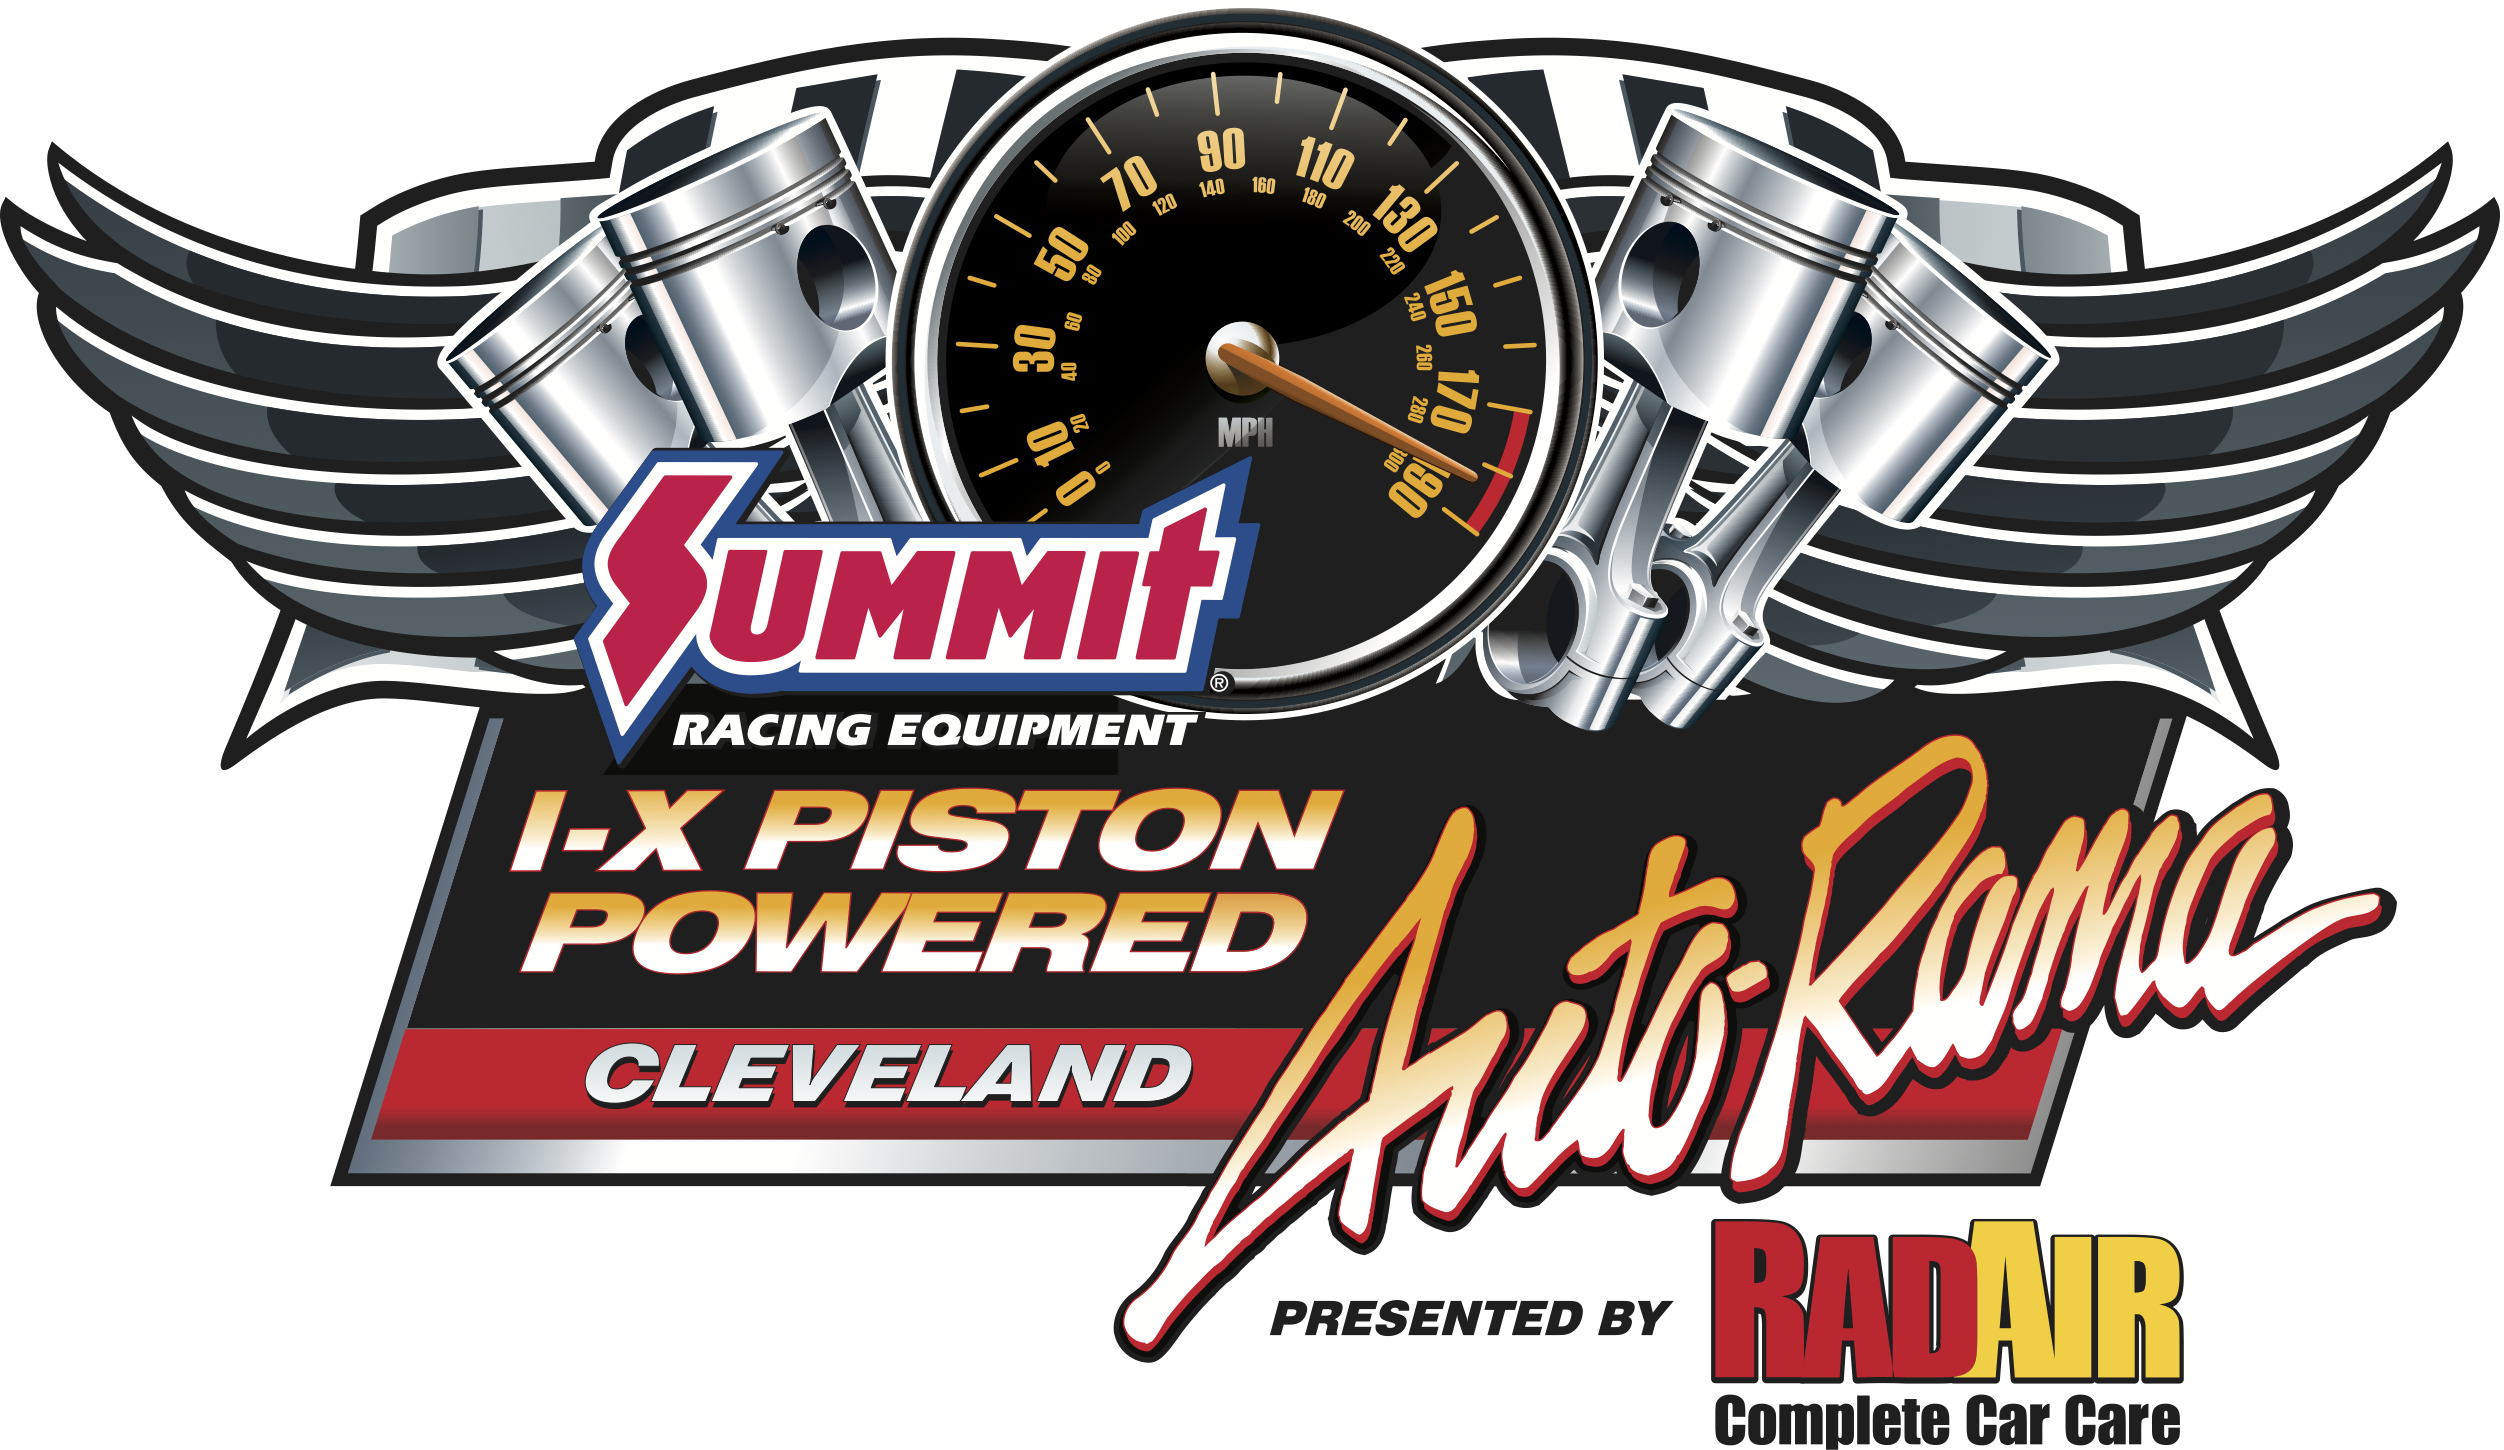 Jay Leno to Appear at the Summit Racing Equipment IX Piston Powered